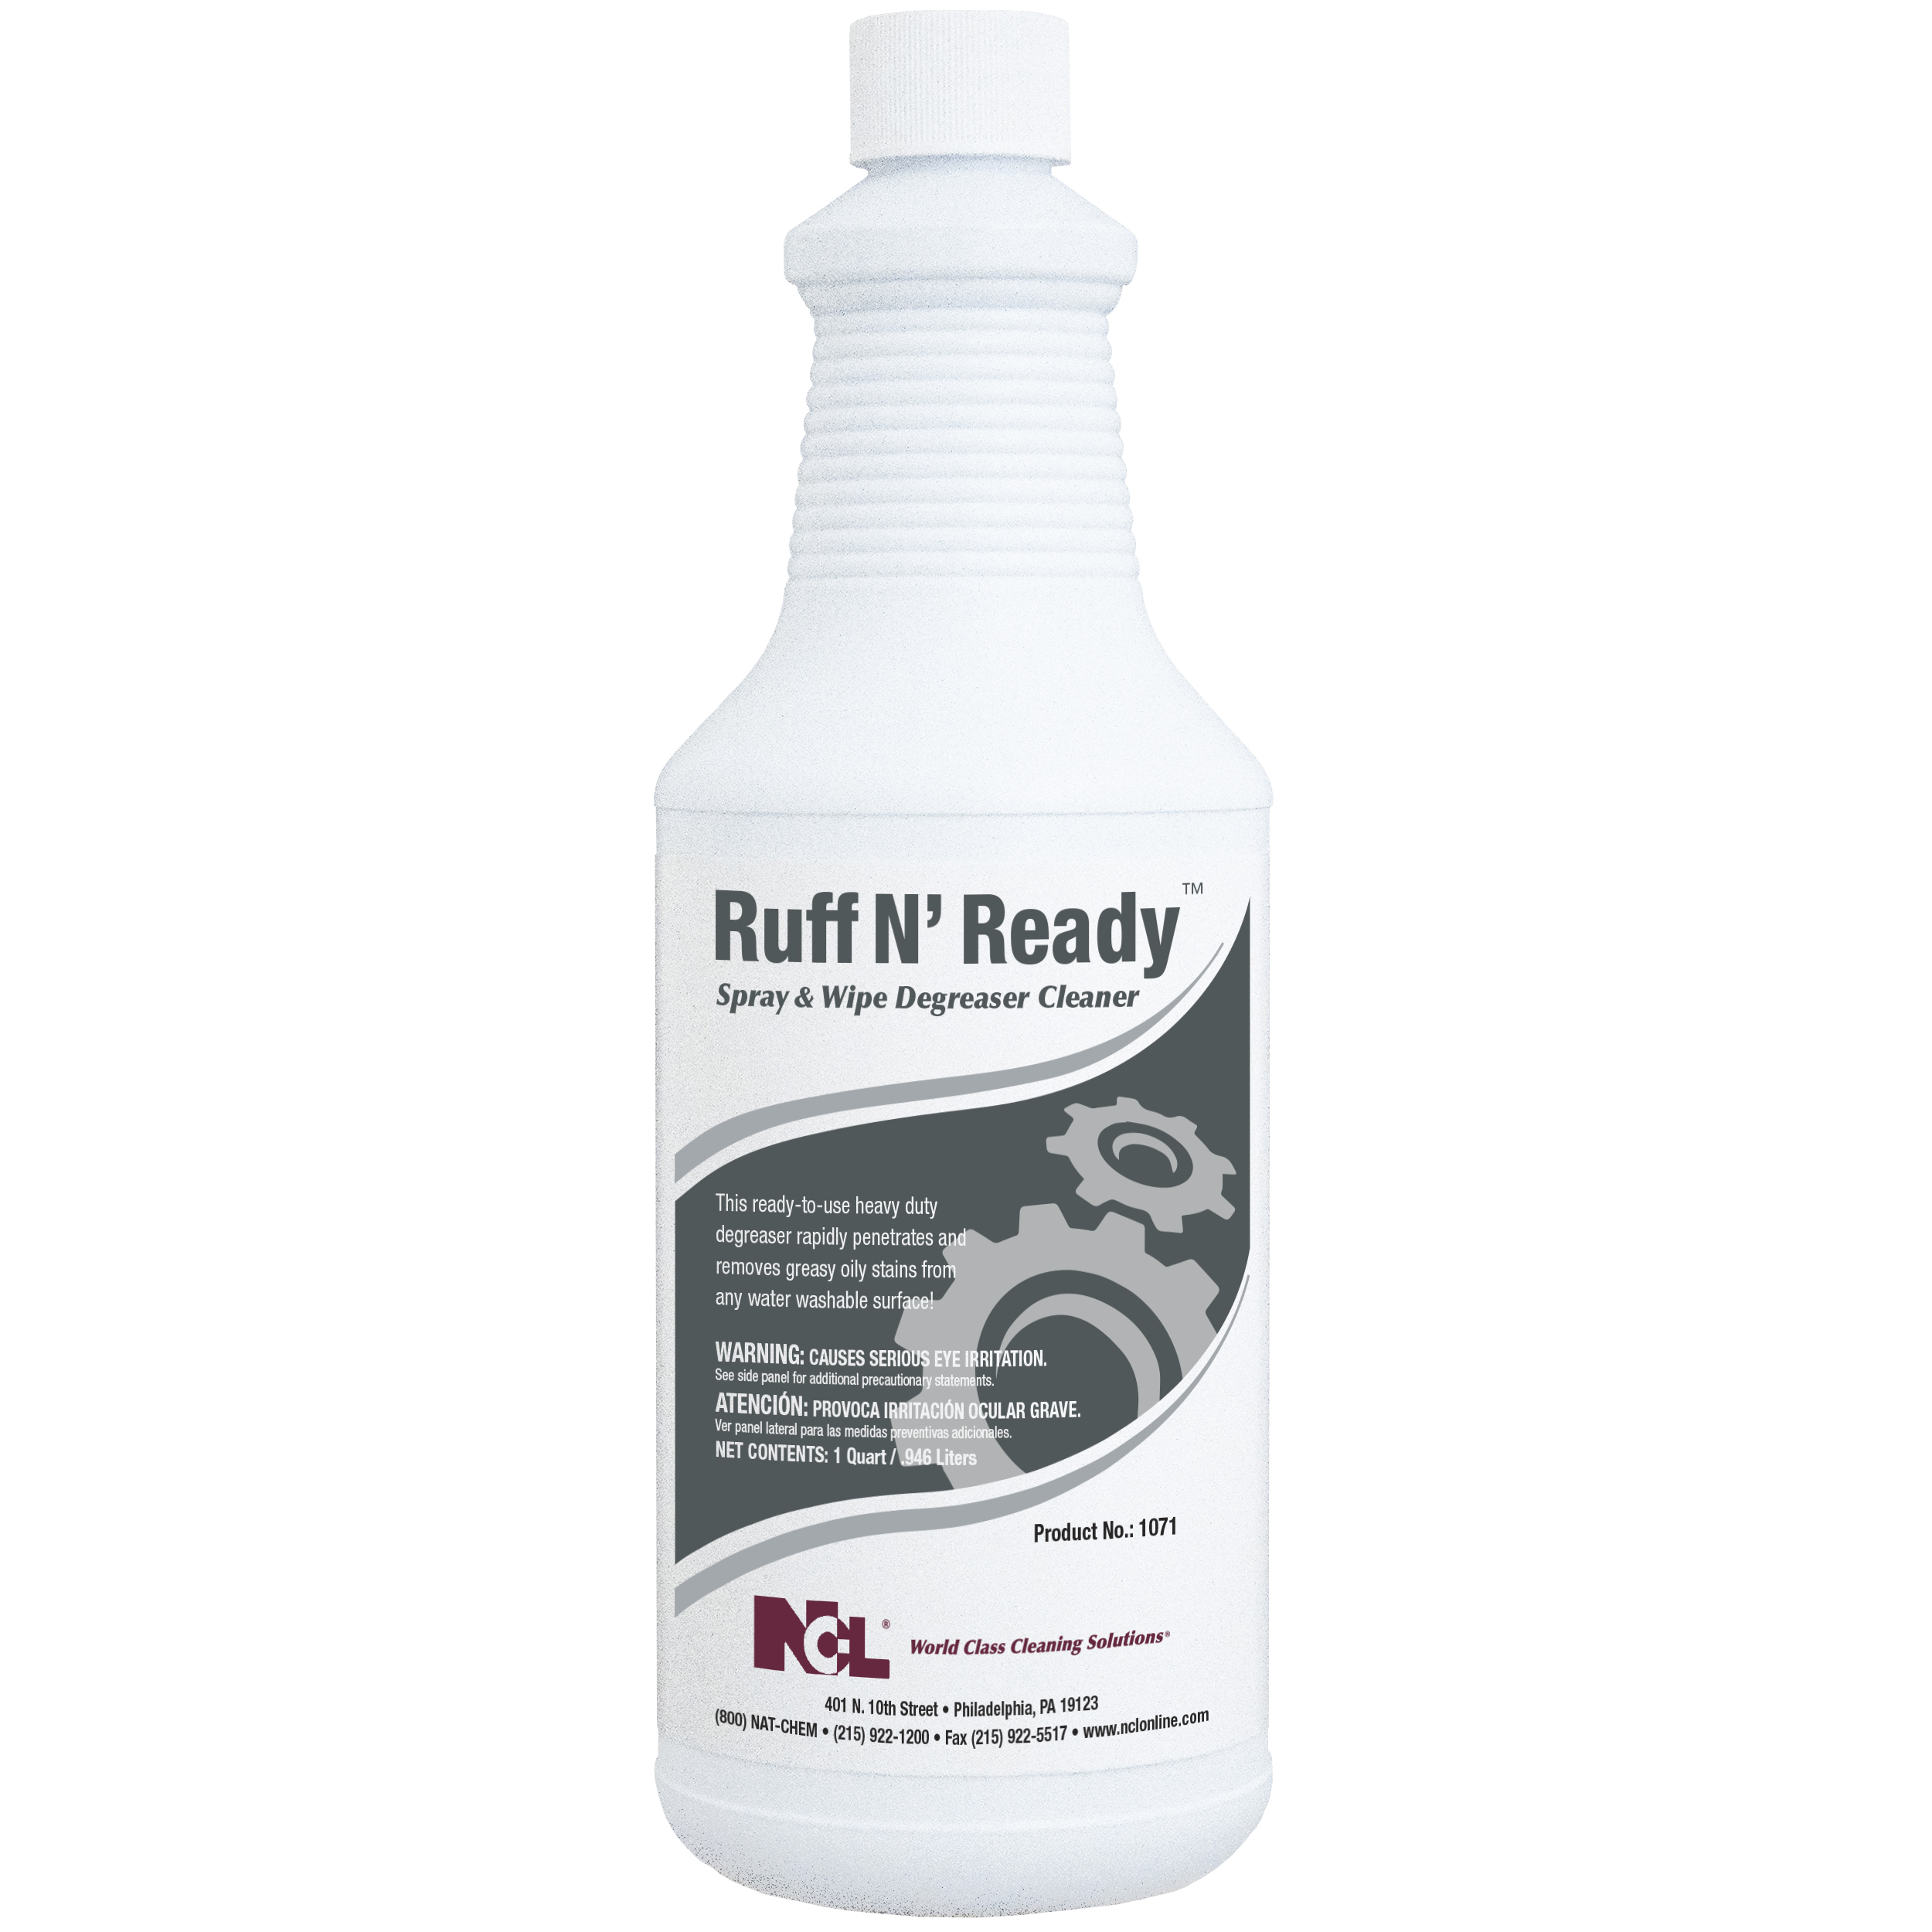  RUFF N' READY Spray and Wipe Degreaser Cleaner 12/32 oz (1 Qt.) Case (NCL1071-36) 